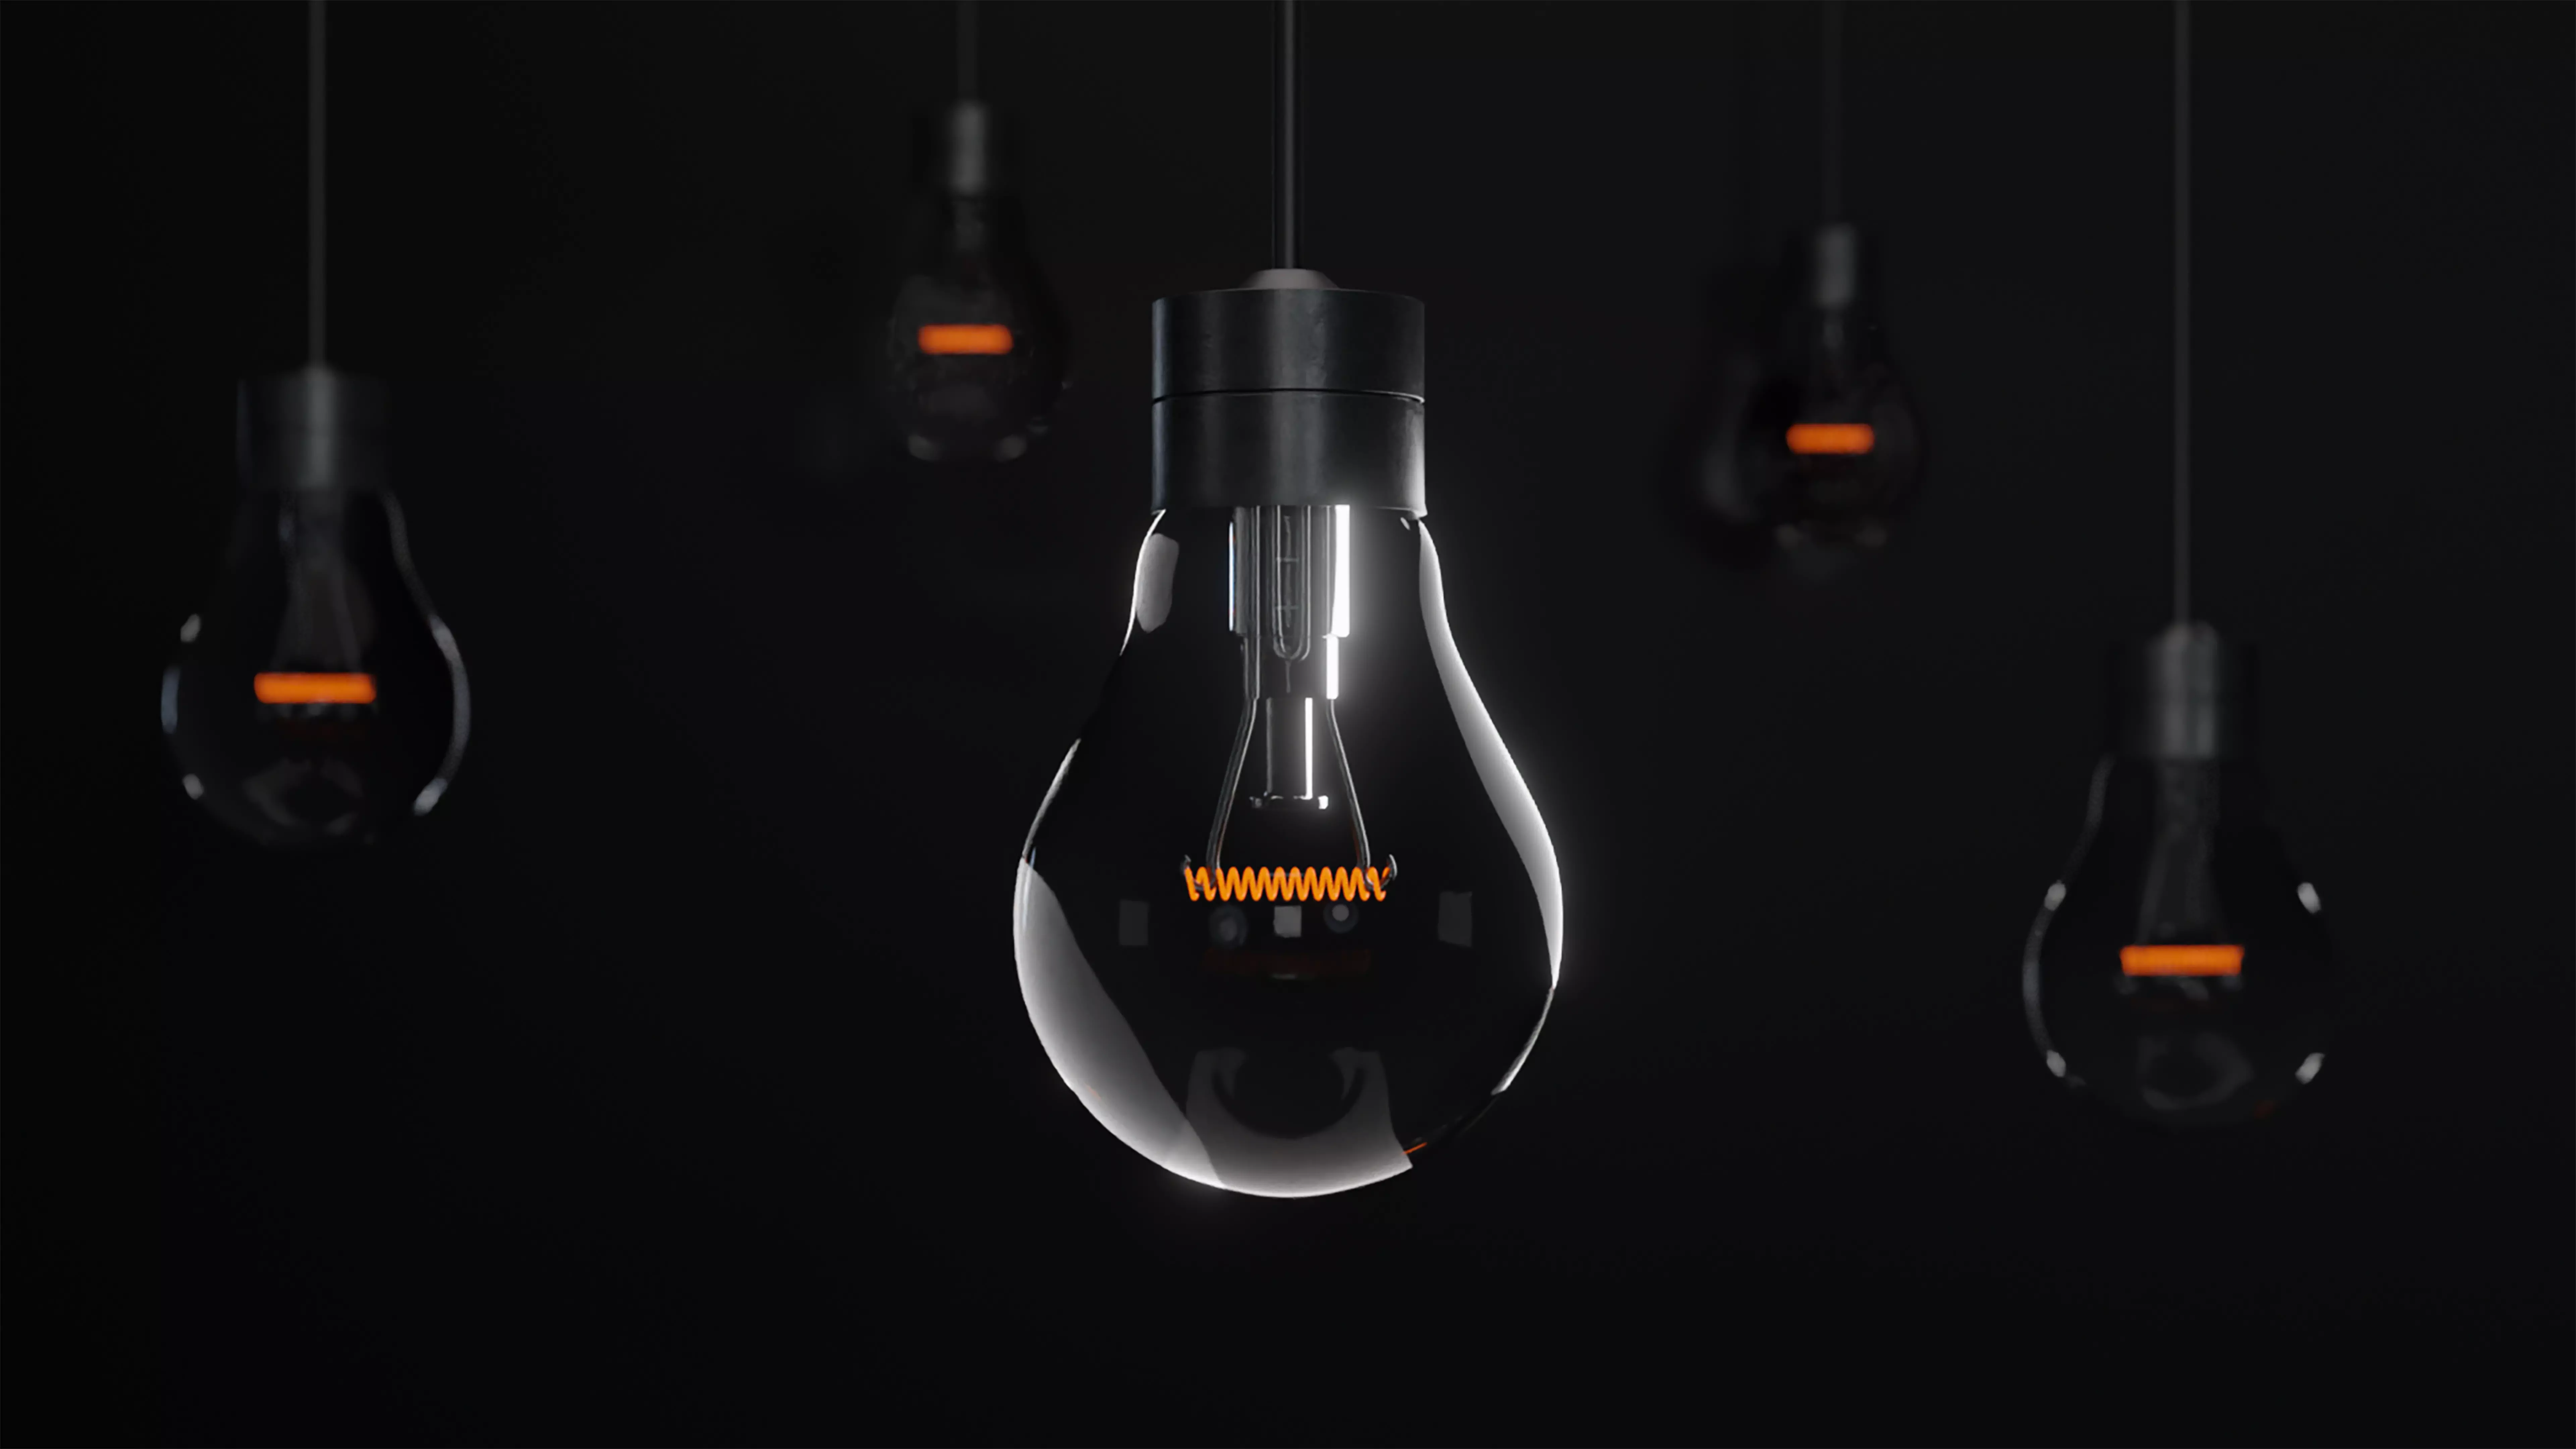 Black background with incandescent light bulbs